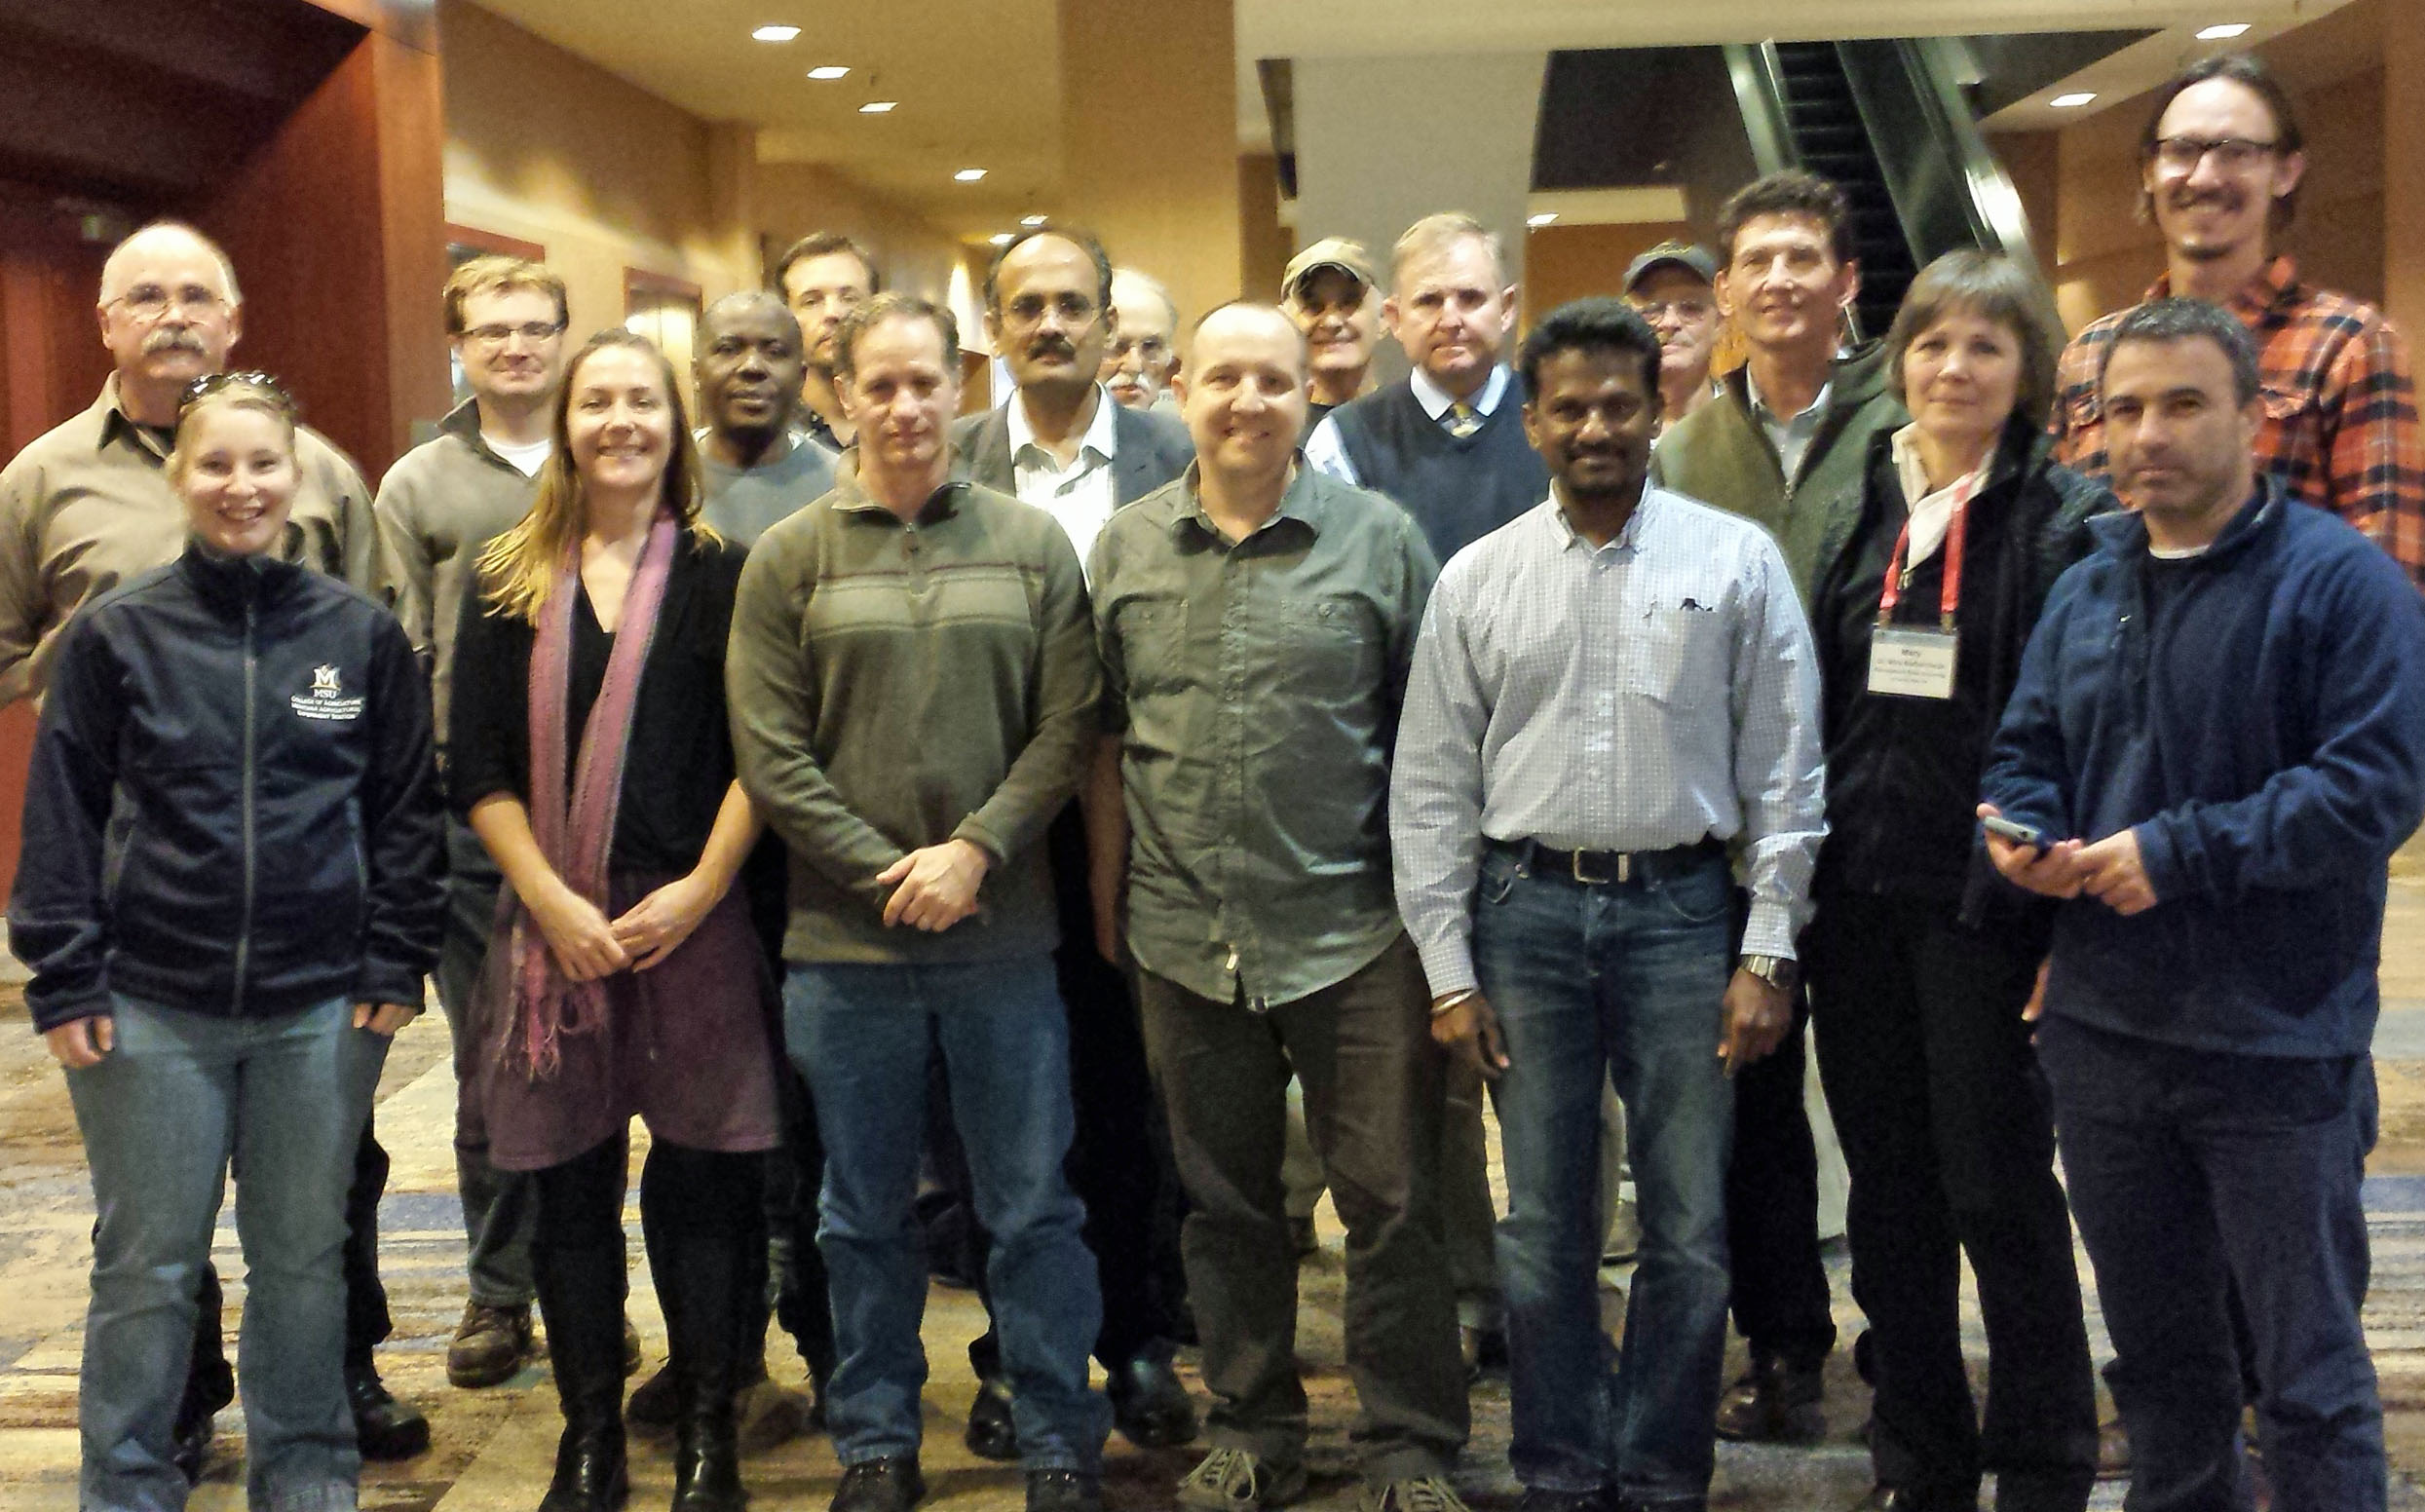 S1052 attendees 2015 annual meeting in Minneapolis, MN